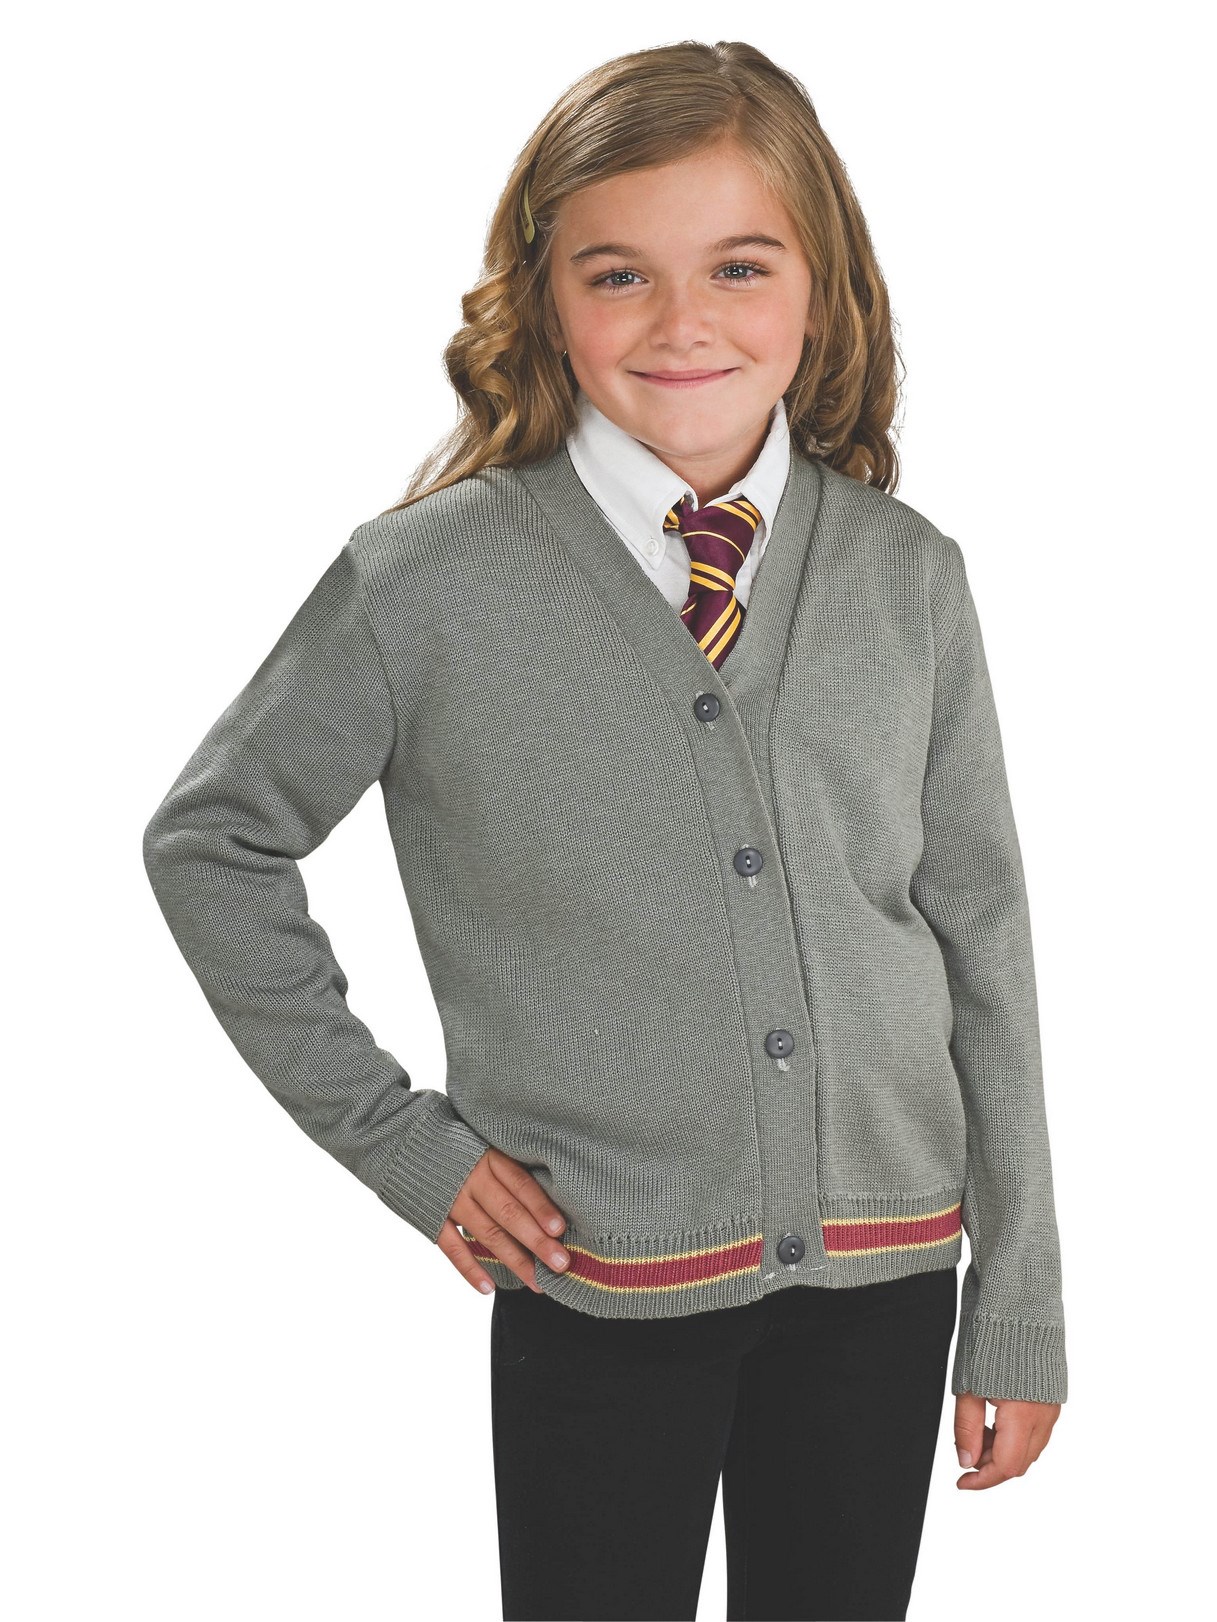 Harry Potter Hermione Cardigan and Tie Child Costume